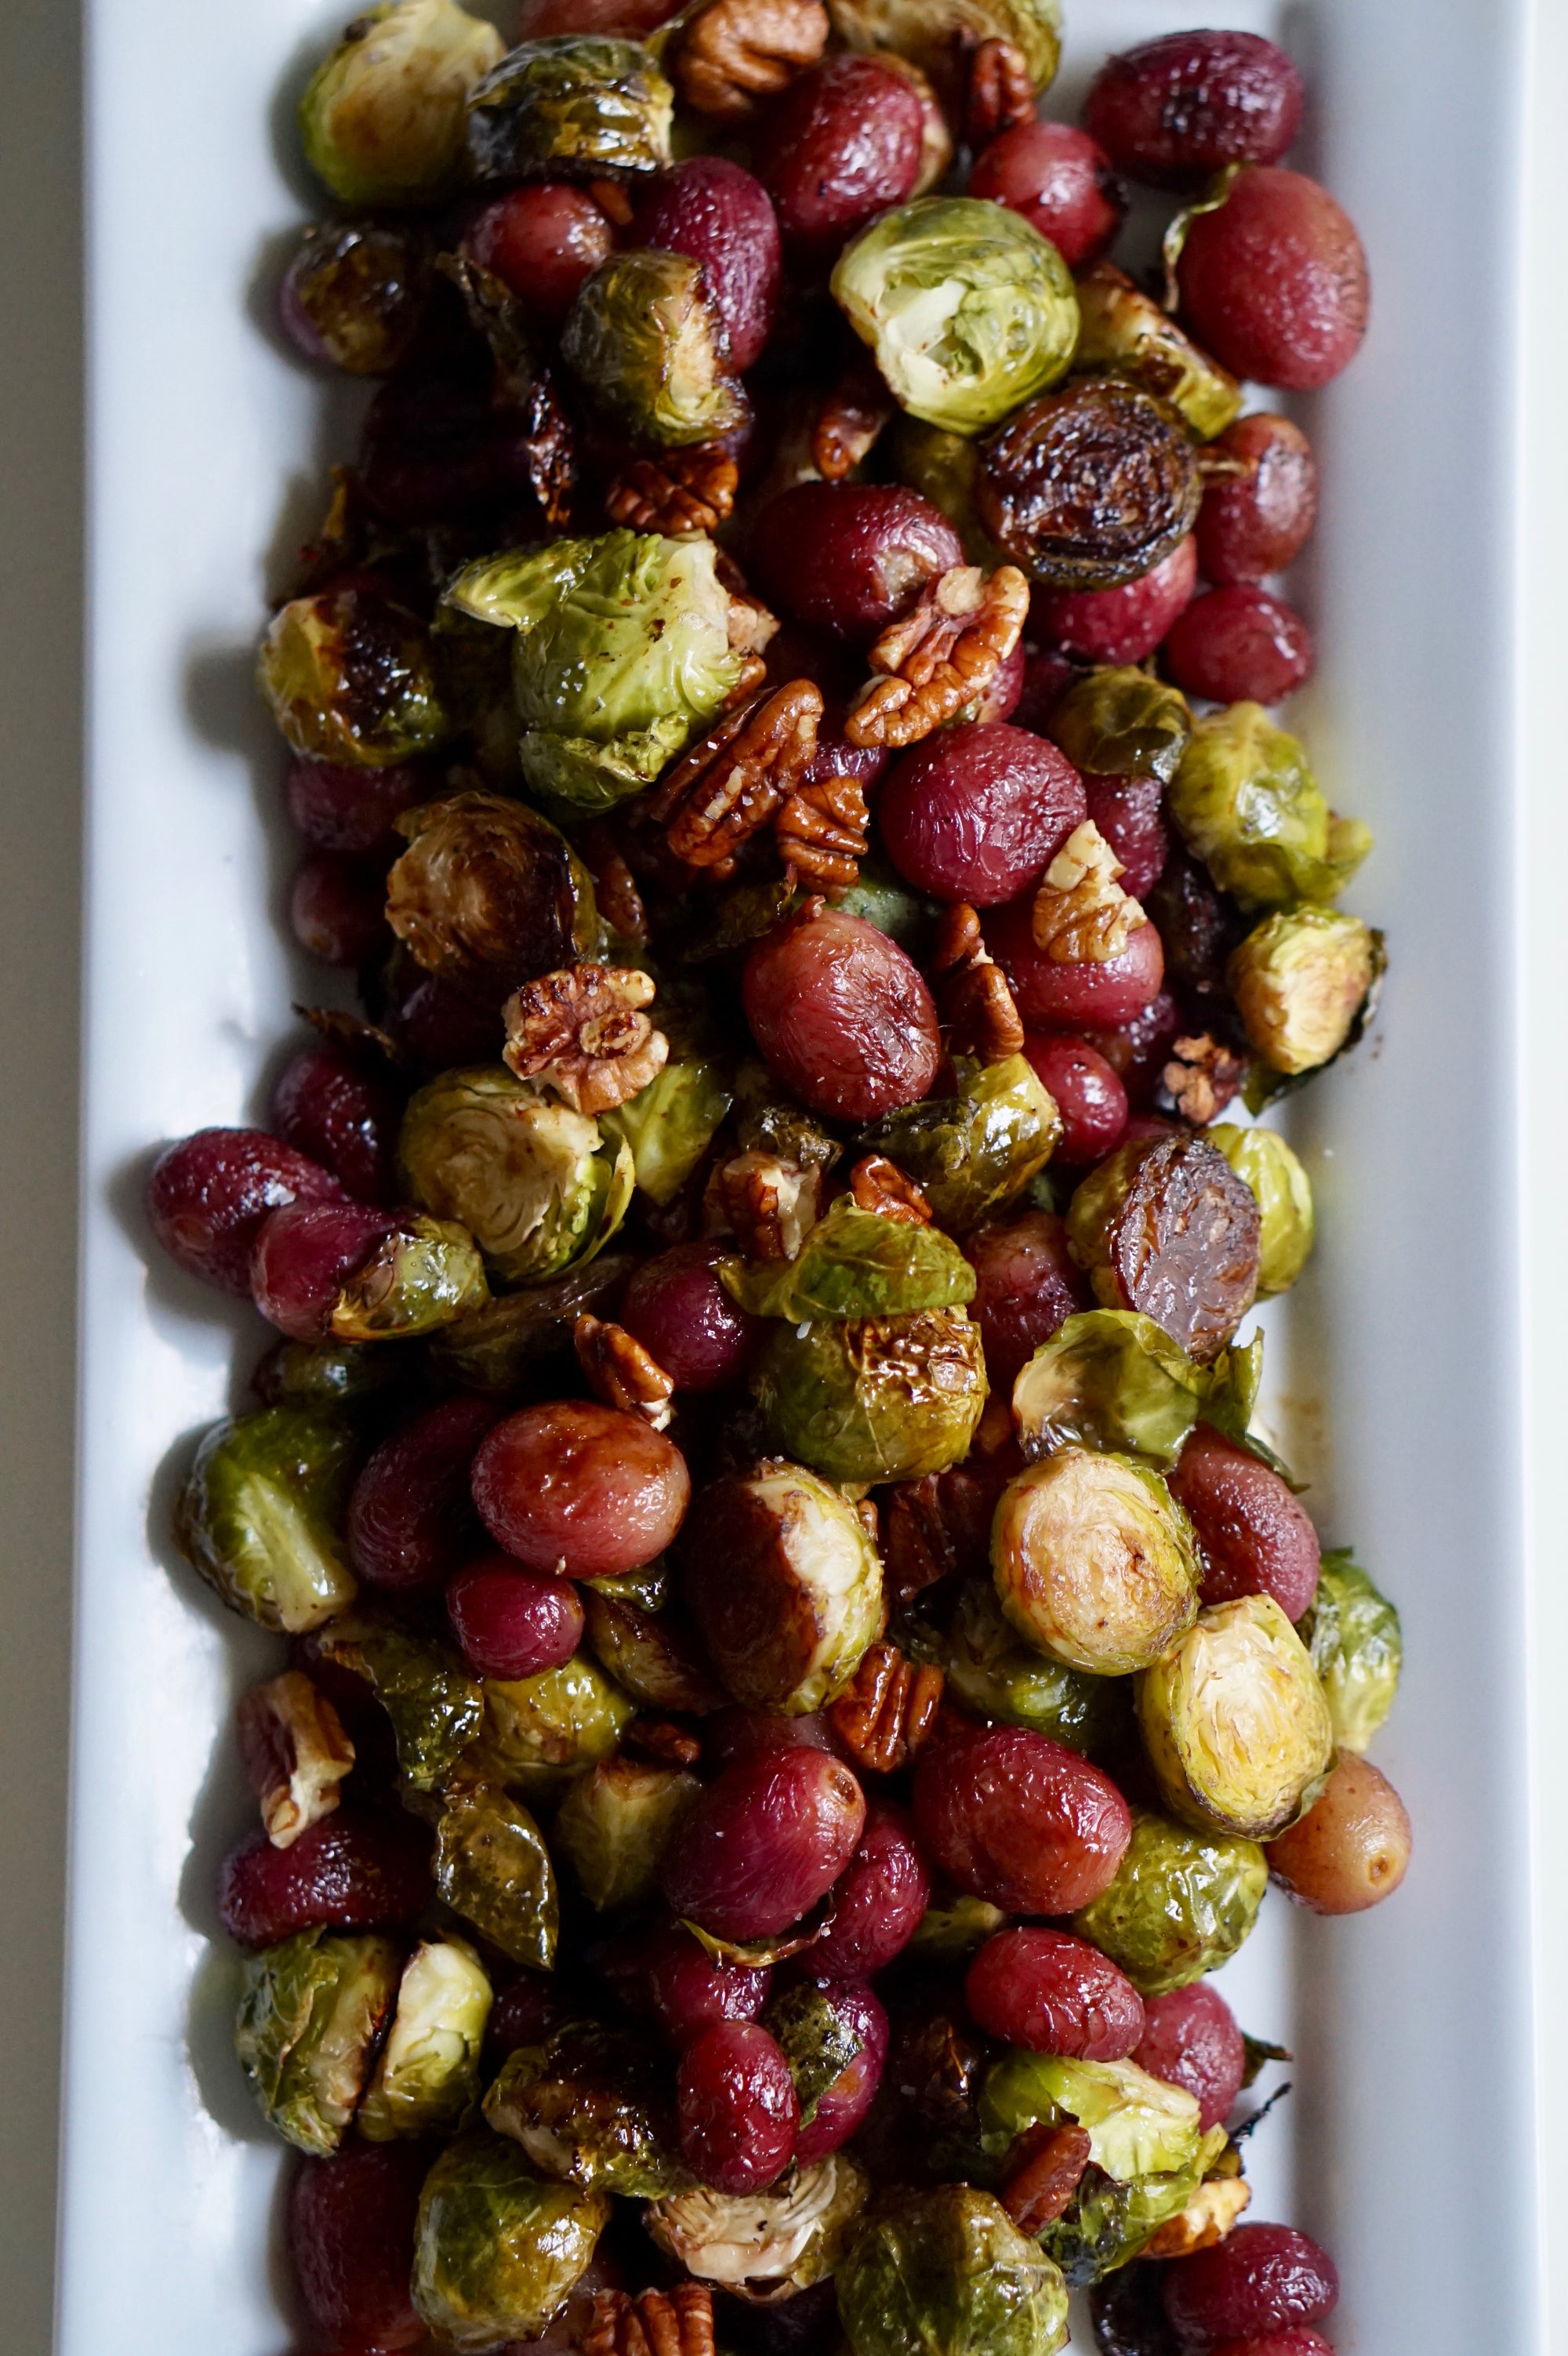 CHEFIT: ROASTED BRUSSELS SPROUTS & GRAPES